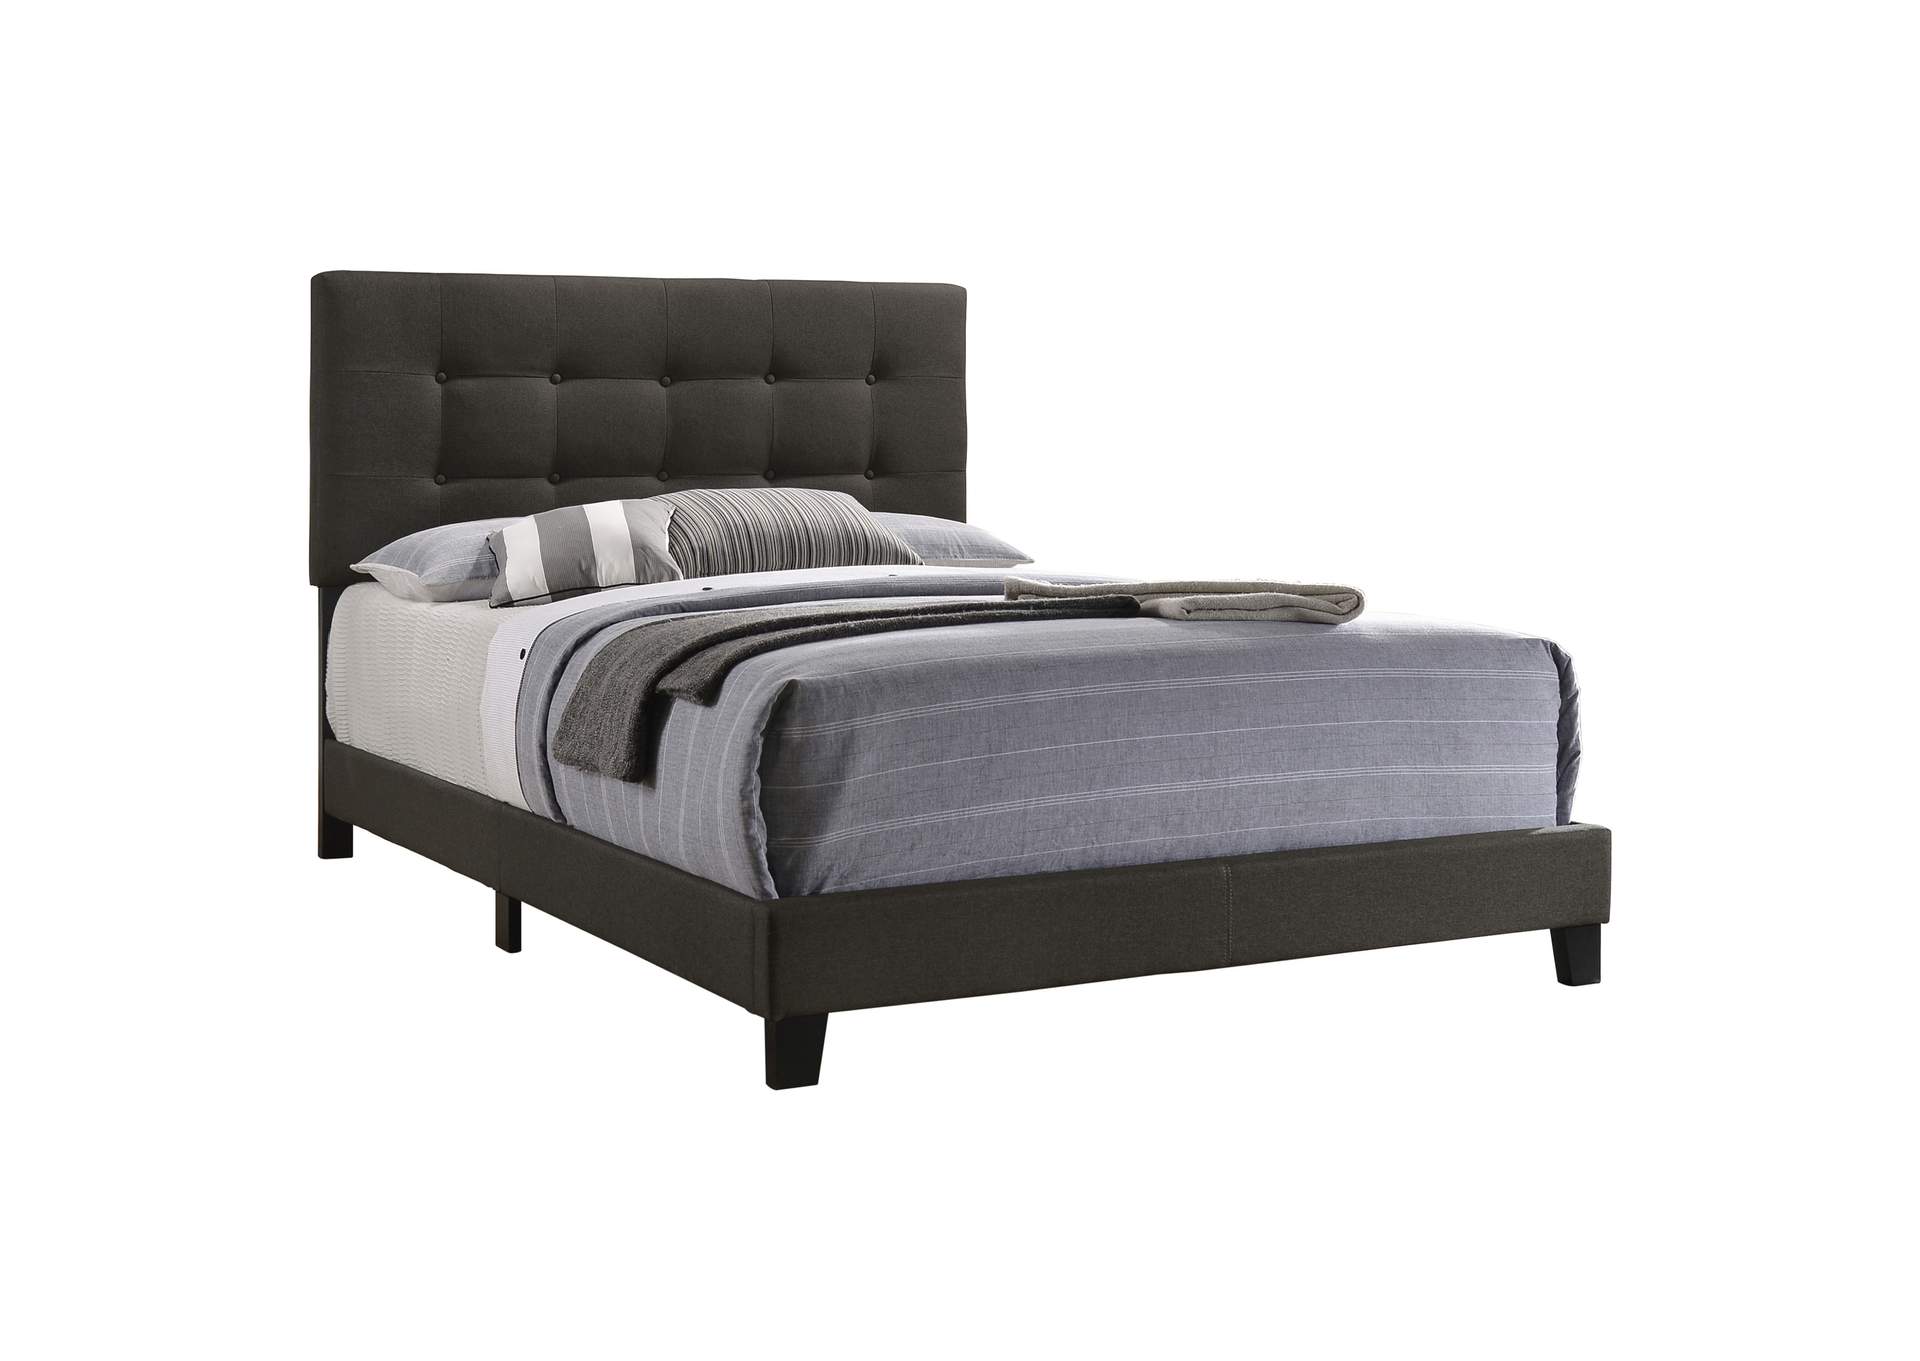 Mapes Tufted Upholstered Eastern King Bed Charcoal,Coaster Furniture